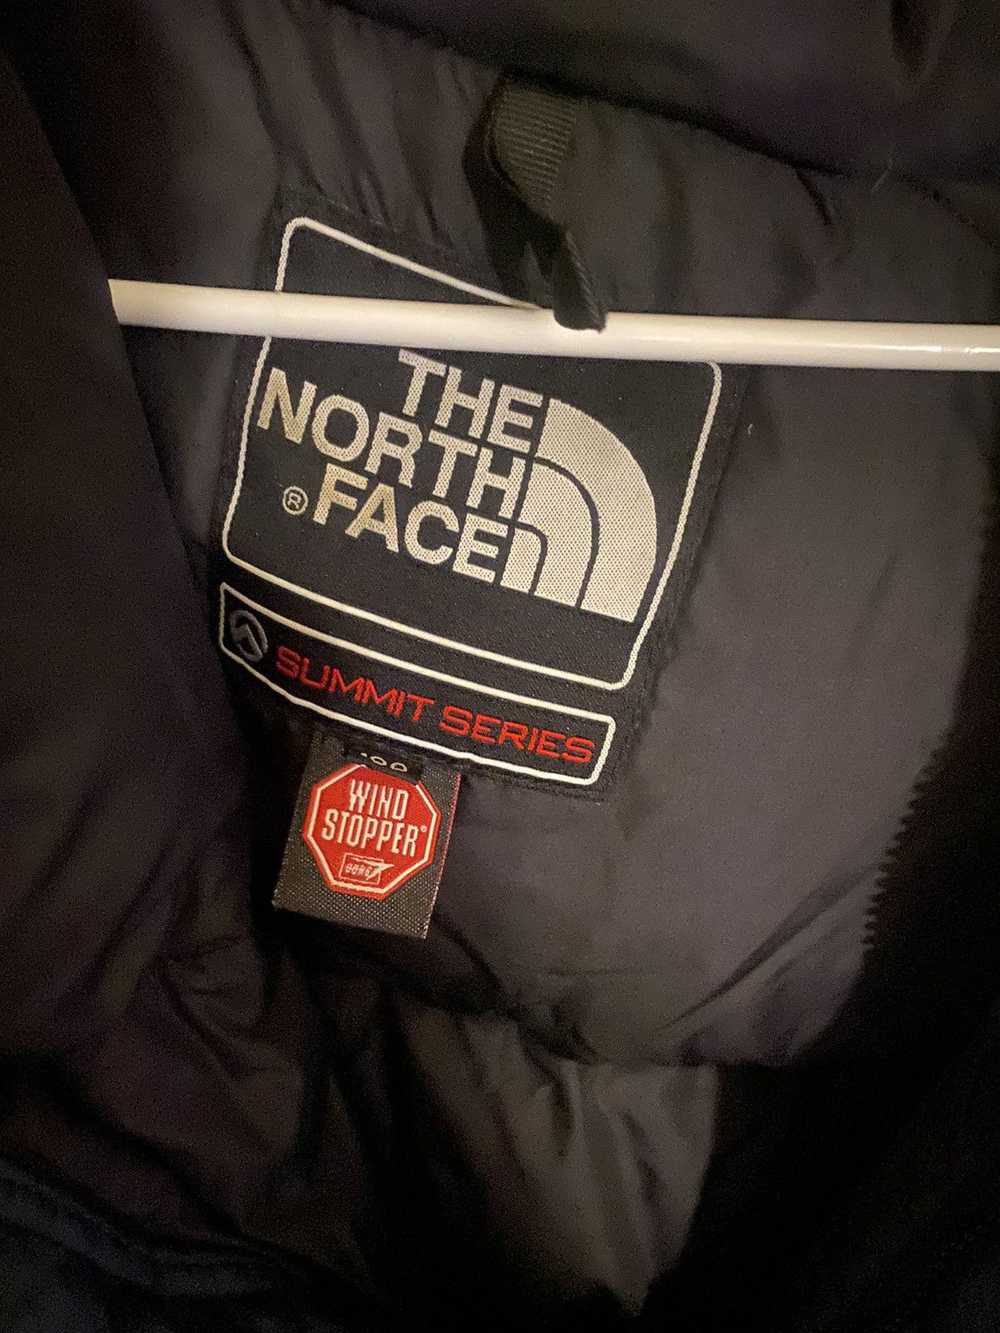 The North Face The North Face summit series puffer - image 3